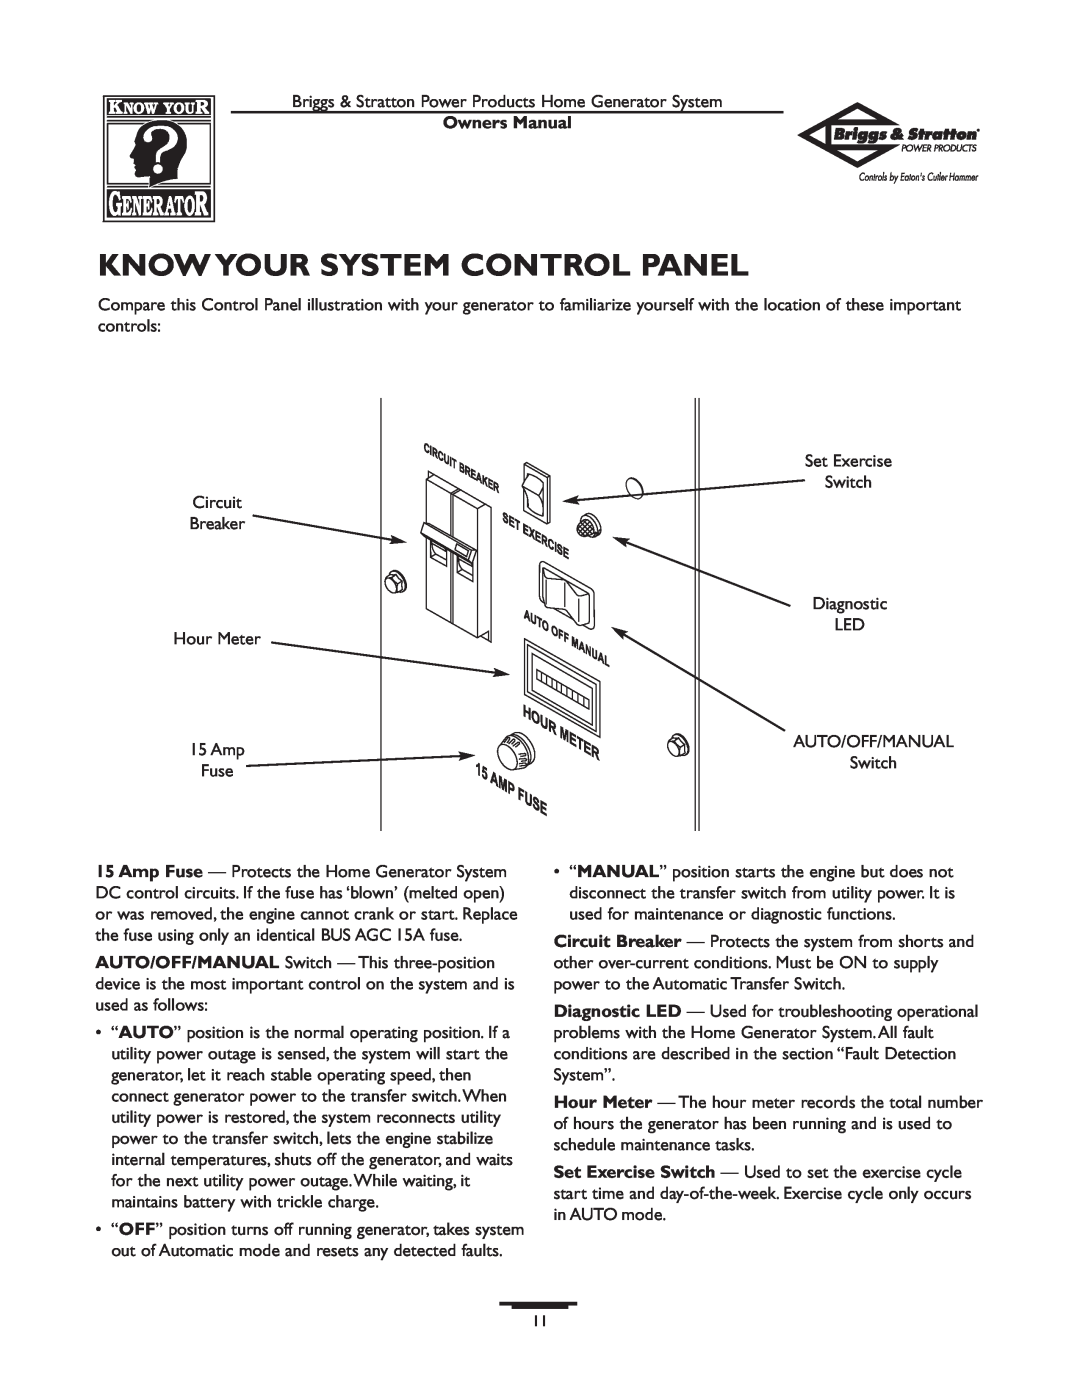 Briggs & Stratton 1679-0 owner manual Know Your System Control Panel, Owners Manual 